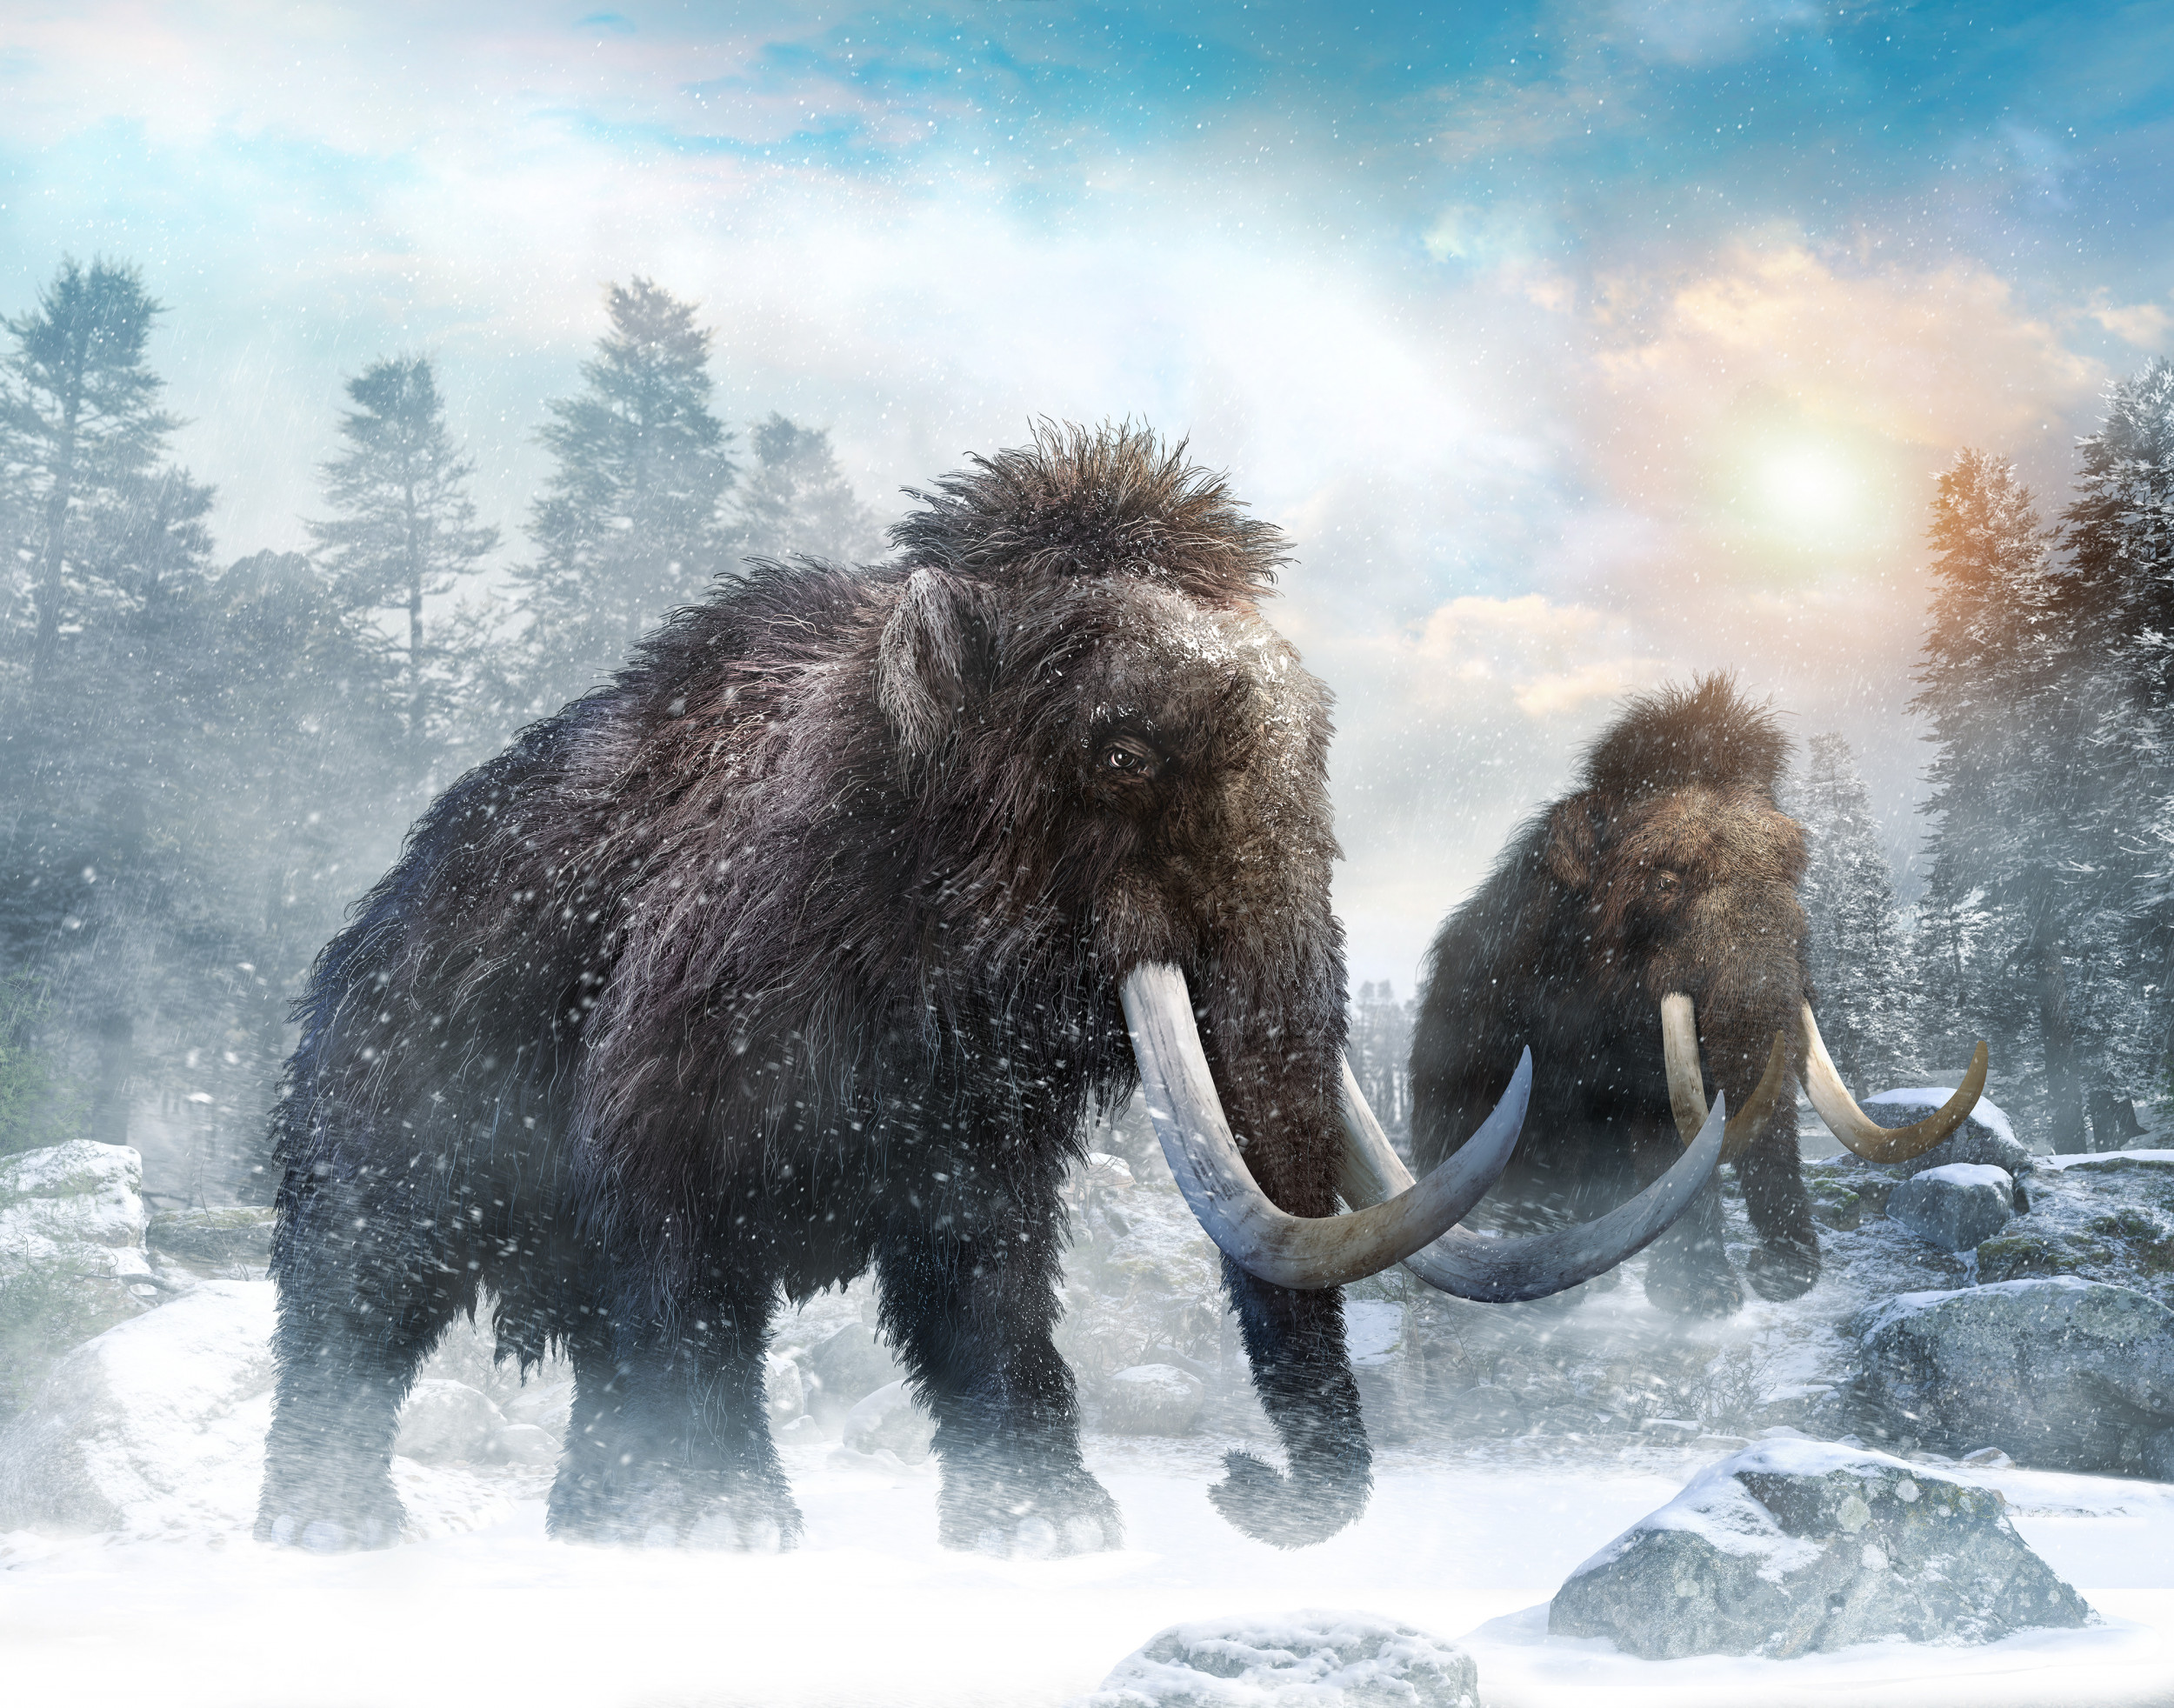 The Man Who Wants To Release Thousands of Wooly Mammoths Into the Arctic